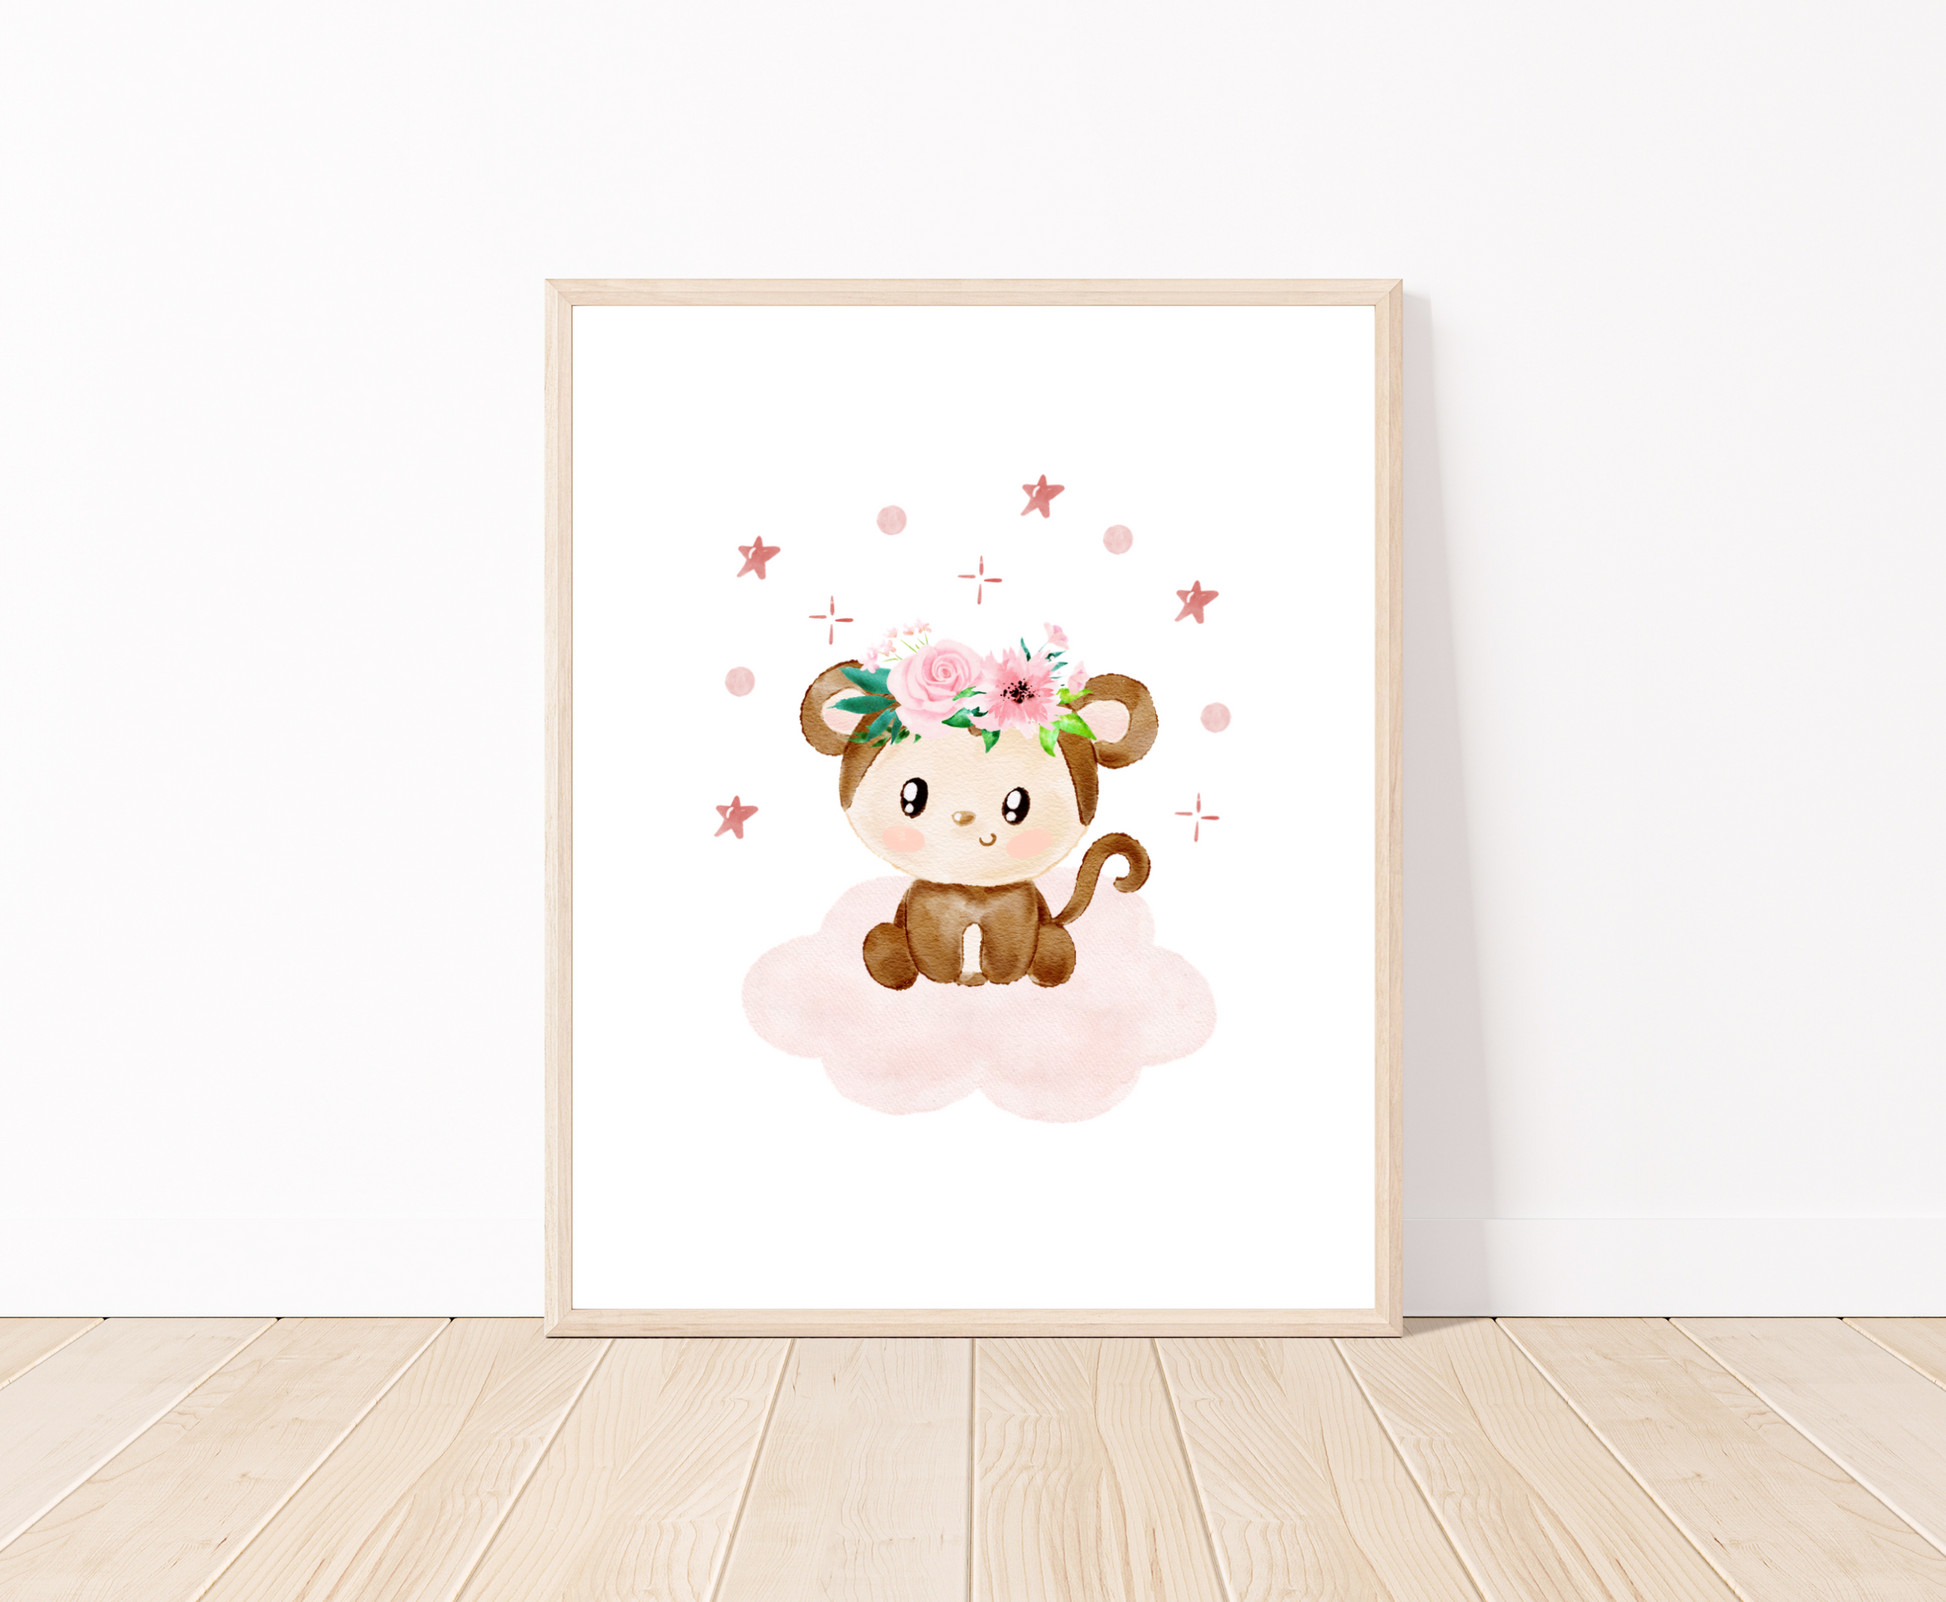 A digital print placed on a white wall and parquet flooring showing a design for a cute baby monkey that has a flower crown on its head and is sitting on a pink cloud with mini stars surrounding its head 